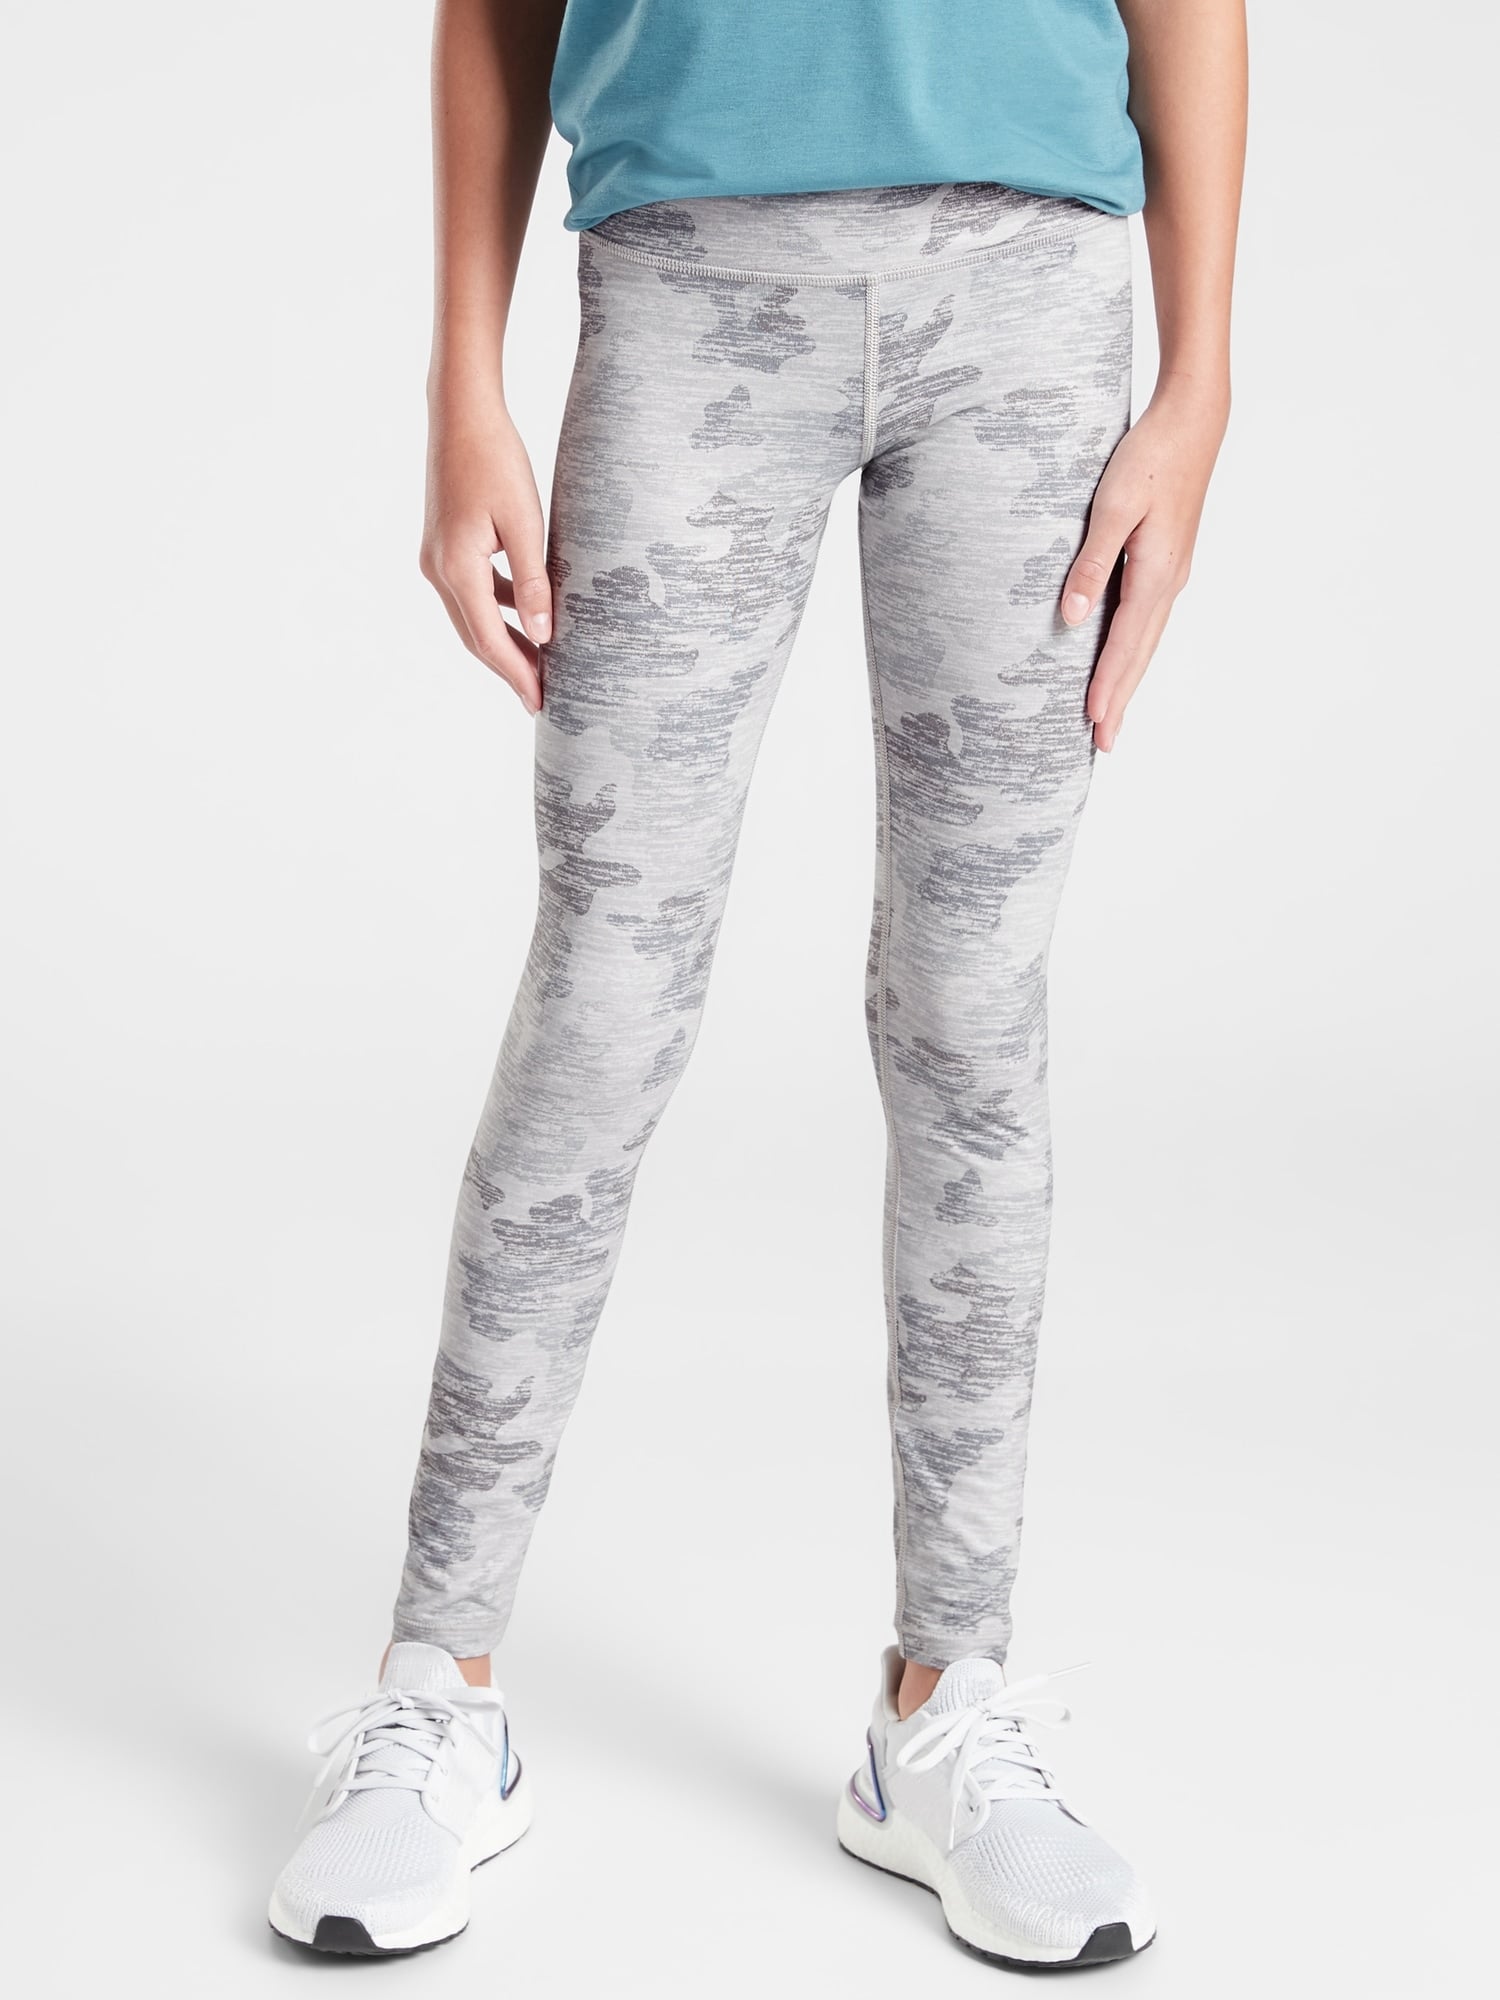 Athleta Girl Printed Chit Chat Tight, Gym Class Hero! This Brand Has the  Best Mother-Daughter Fitness Sets